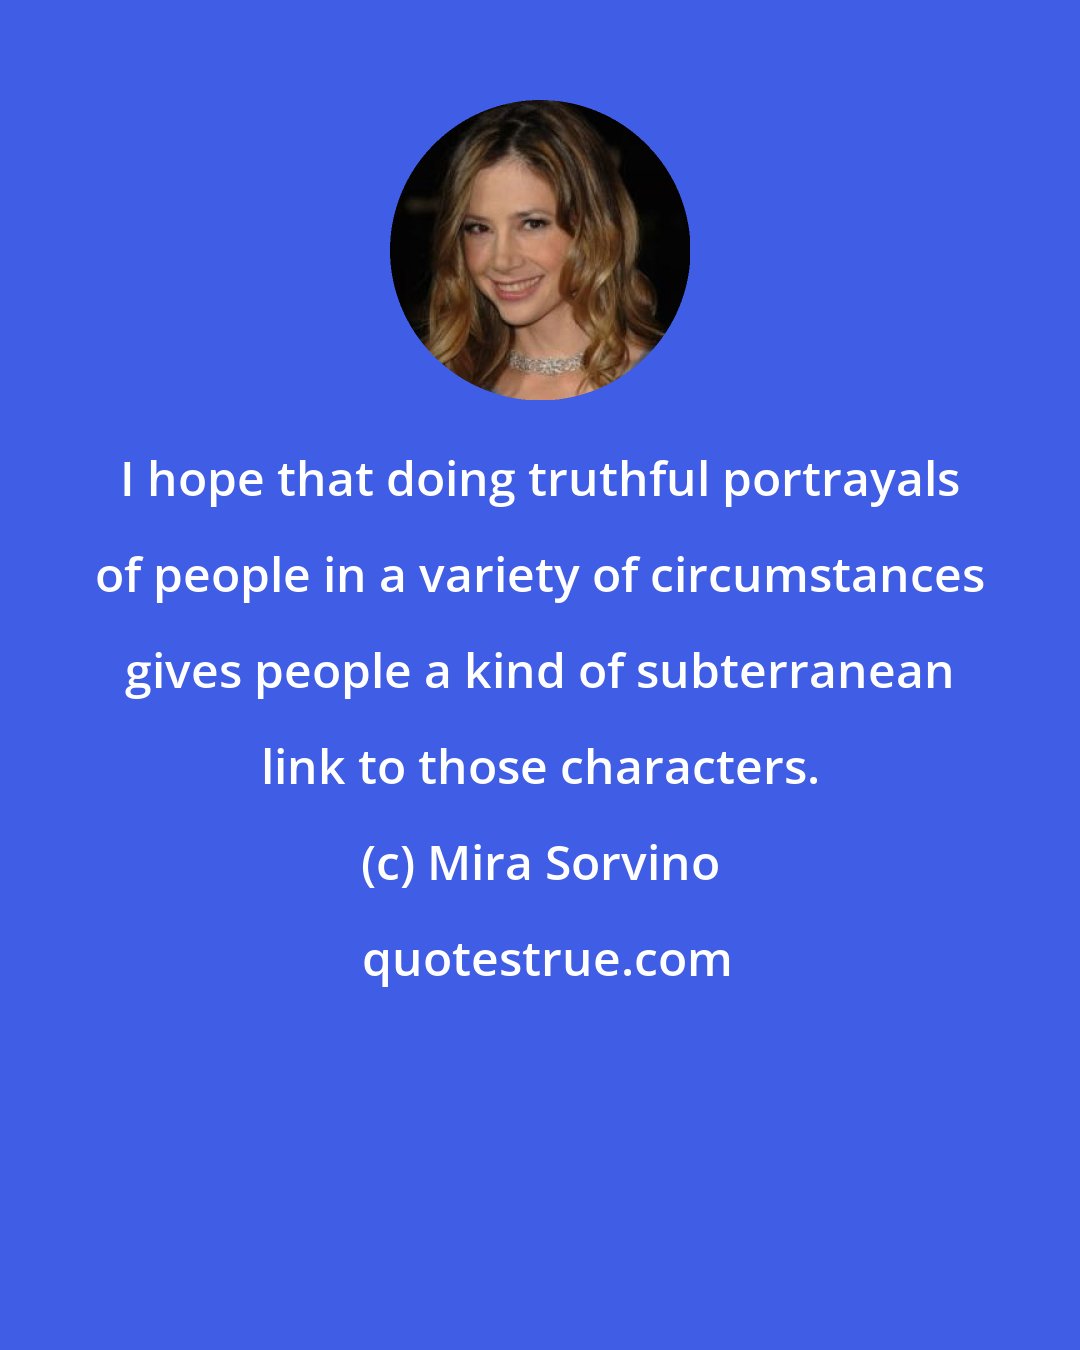 Mira Sorvino: I hope that doing truthful portrayals of people in a variety of circumstances gives people a kind of subterranean link to those characters.